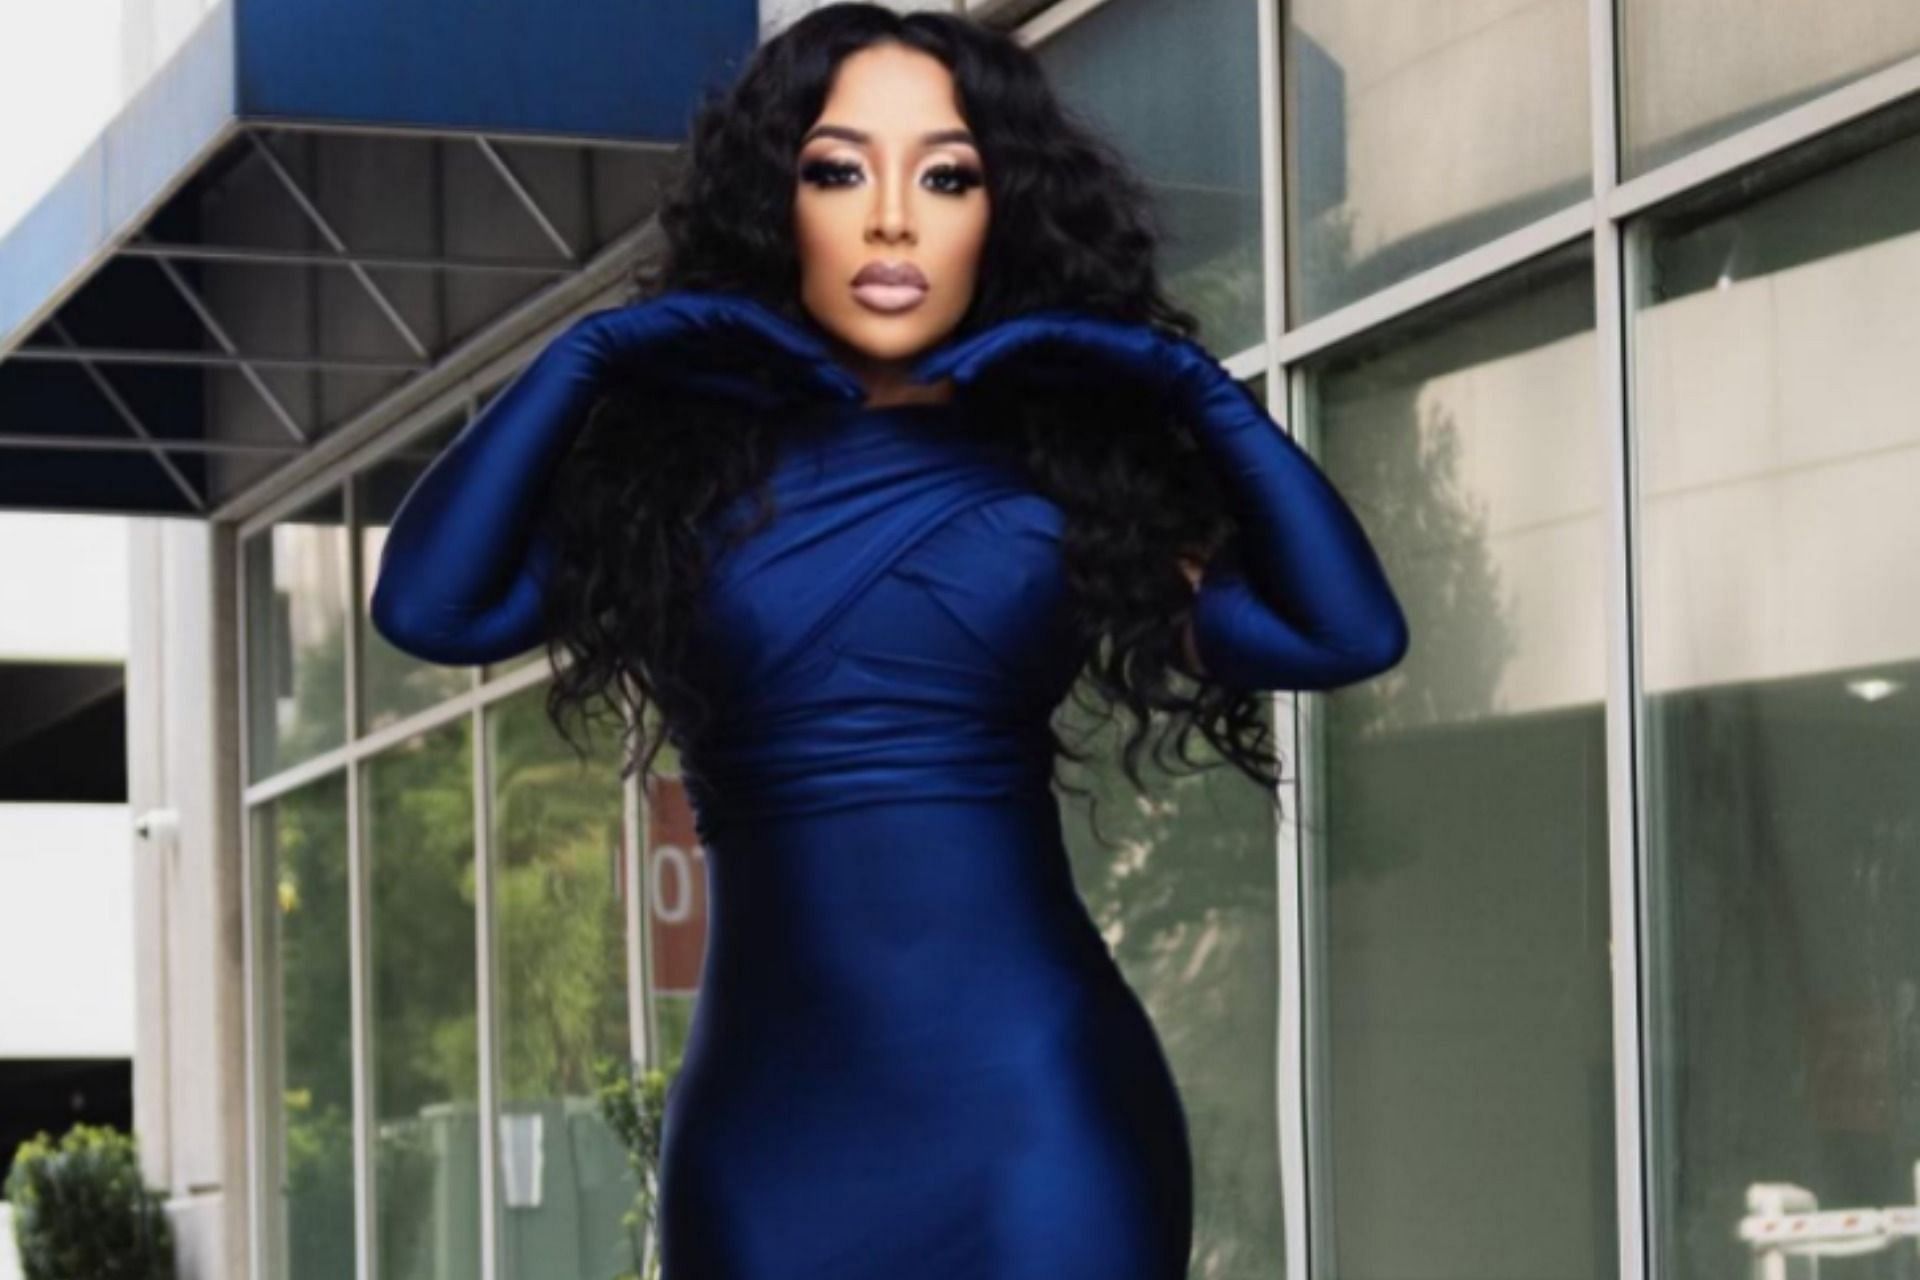 K Michelle goes viral after flashing audience during the concert (Image via kmichellemusic/Instagram)